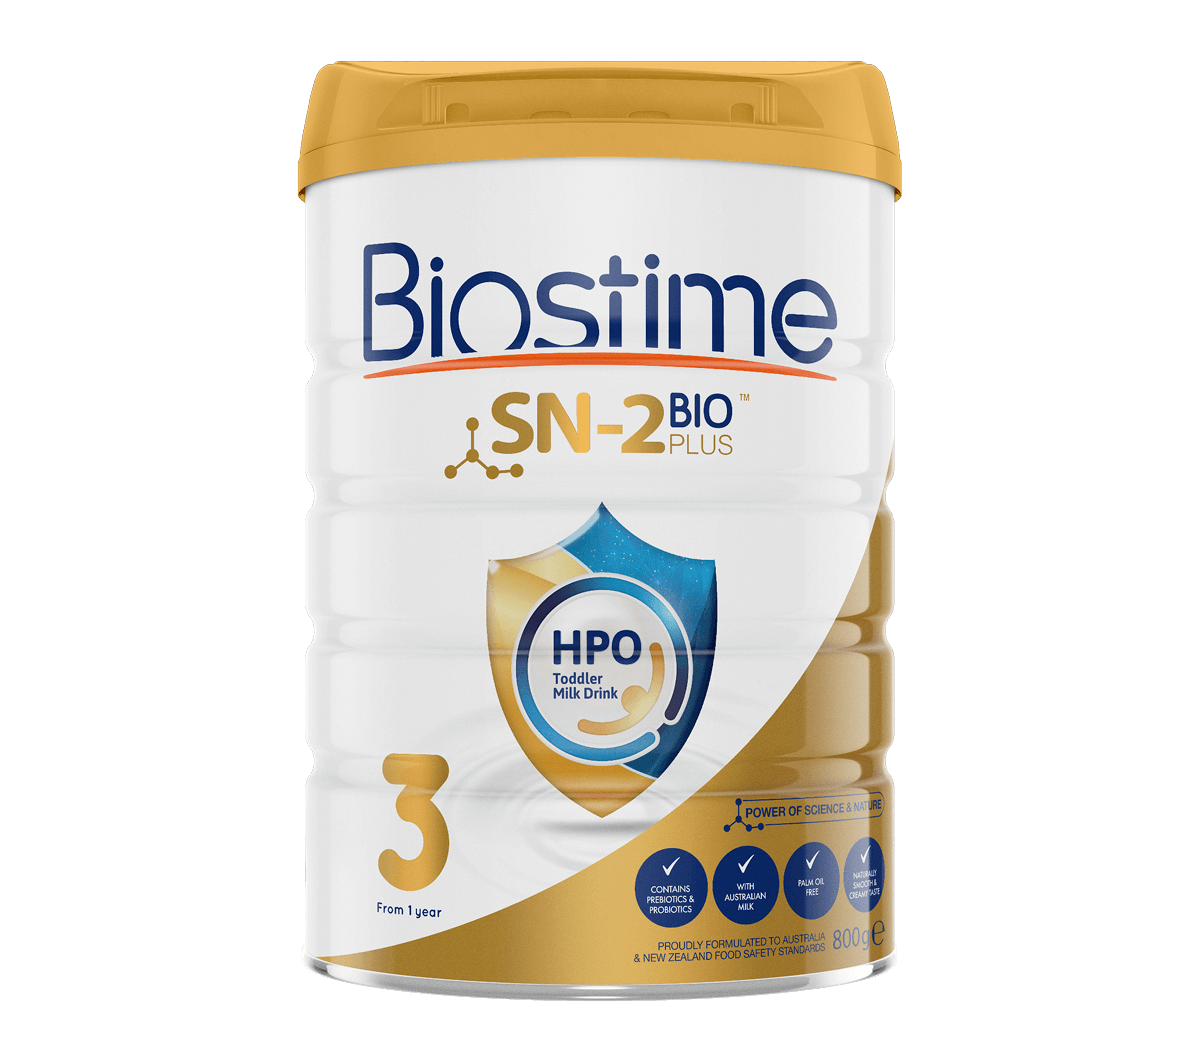  Biostime Baby Vitamin D Drops for Infants & Toddlers